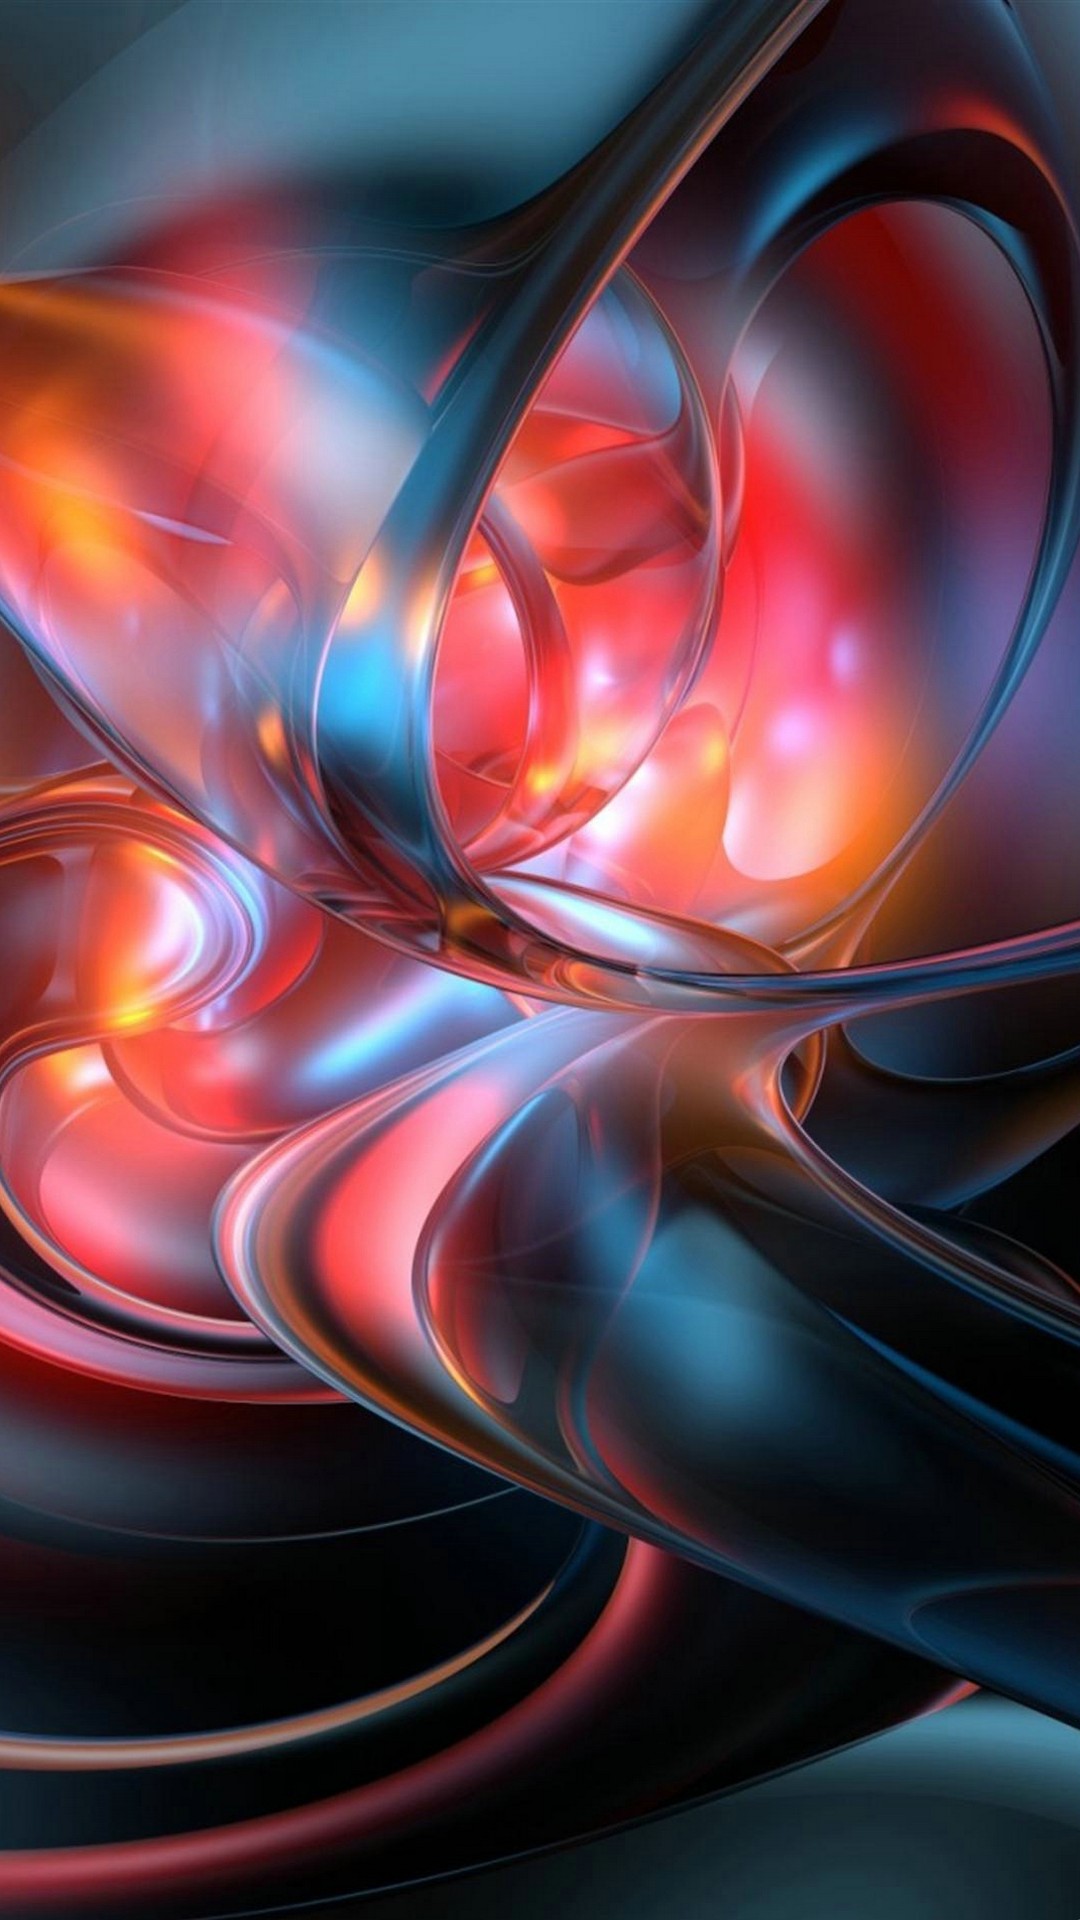 Android Wallpaper Abstract - 2020 Android Wallpapers